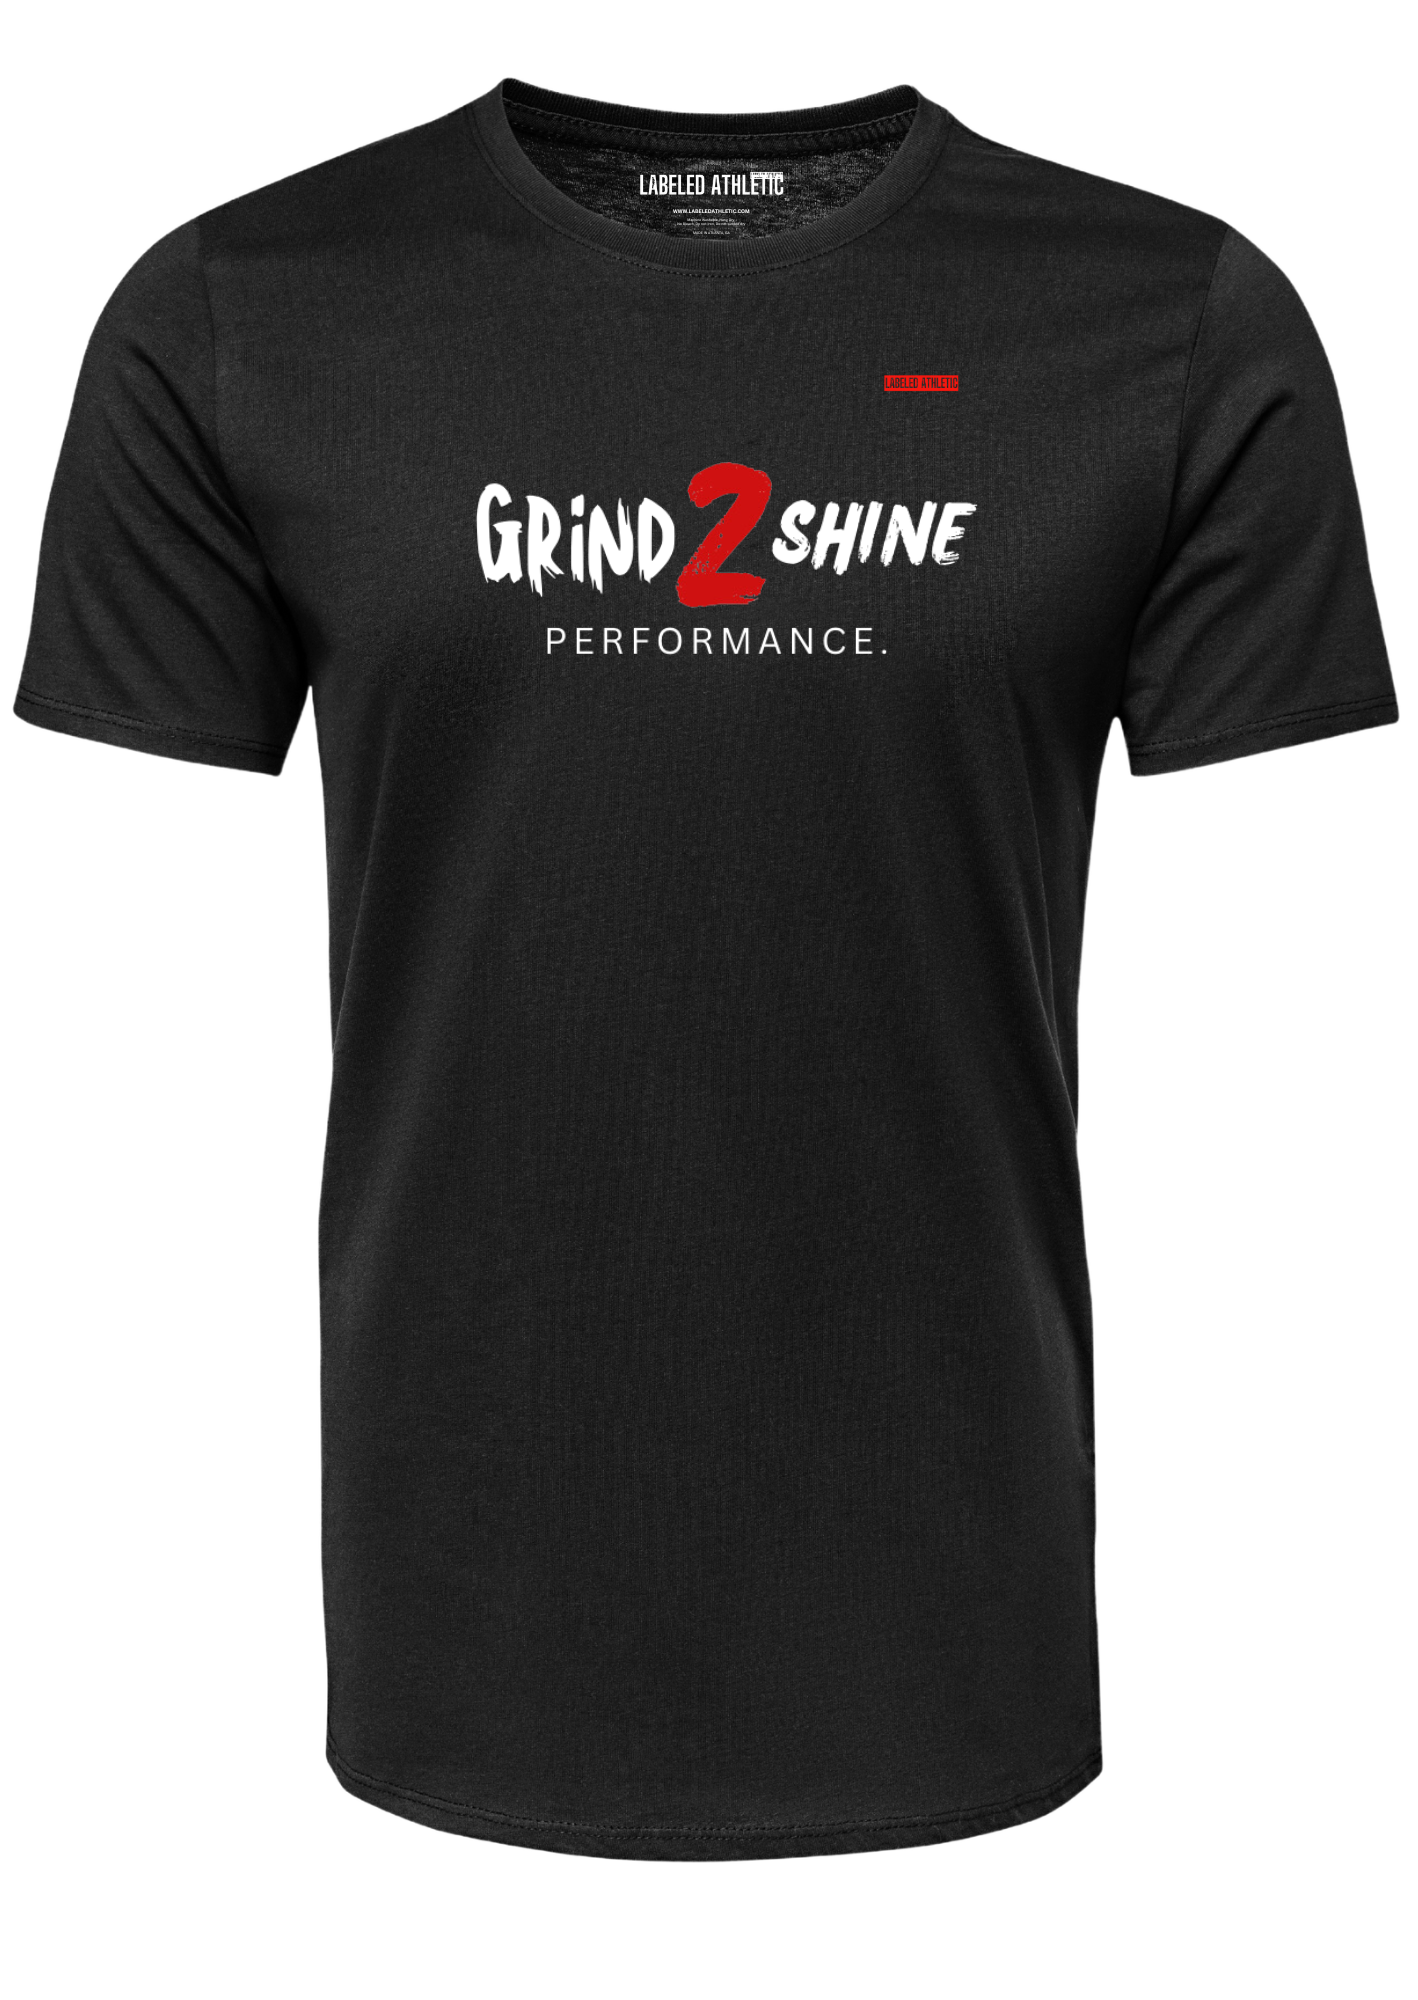 "GRIND 2 SHINE" LABELED ATHLETIC T-SHIRT | BLACK/WHITE/RED